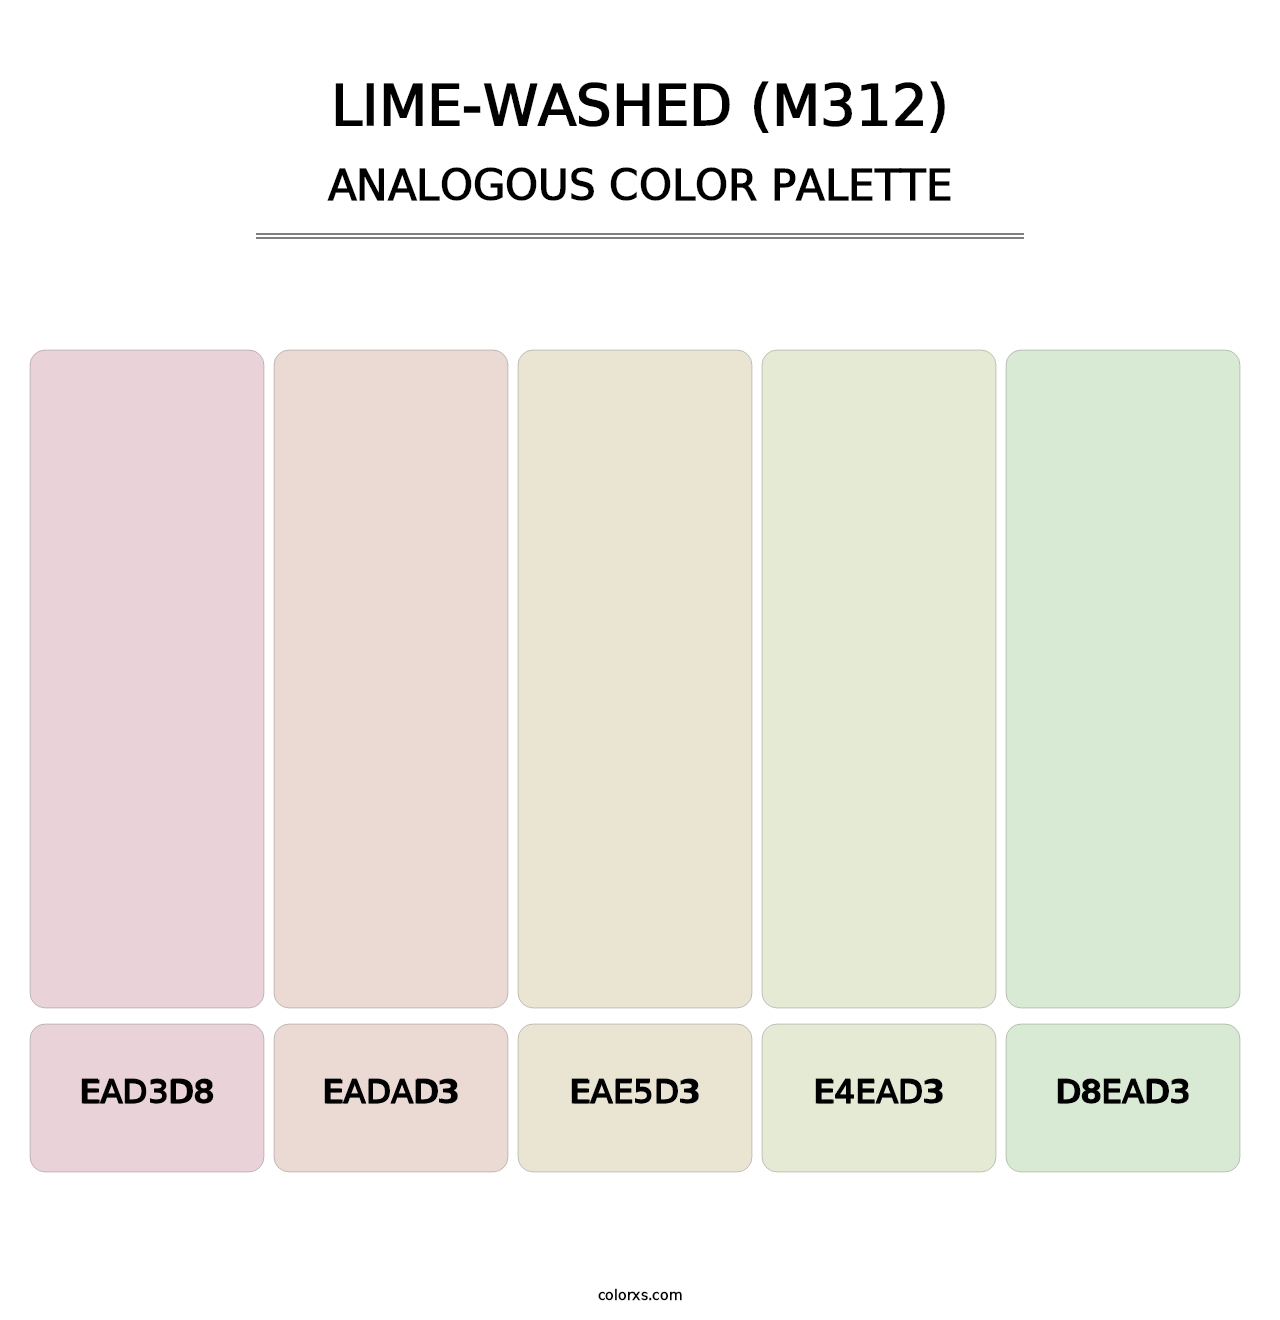 Lime-Washed (M312) - Analogous Color Palette